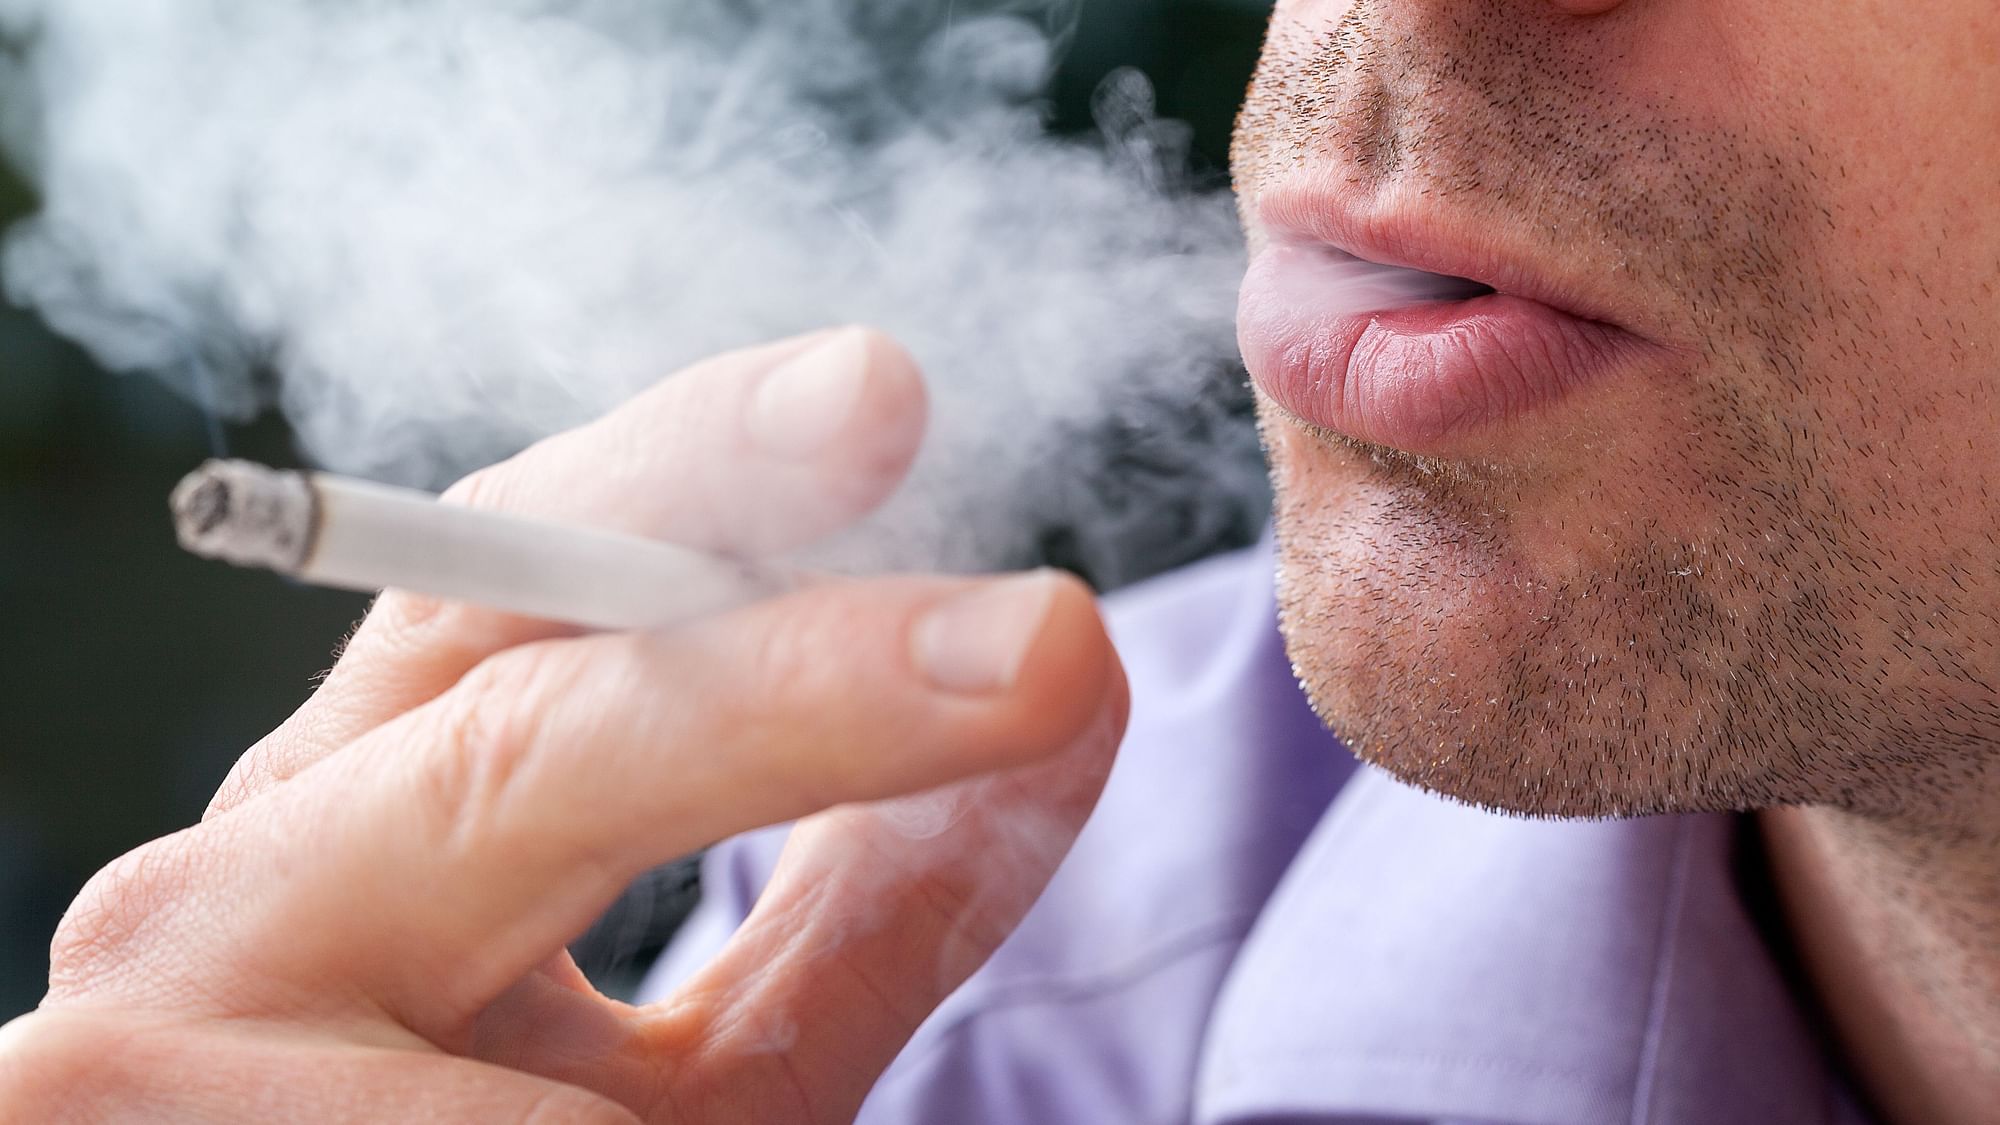 Light Smoking is almost just as bad as heavy smoking, says new study